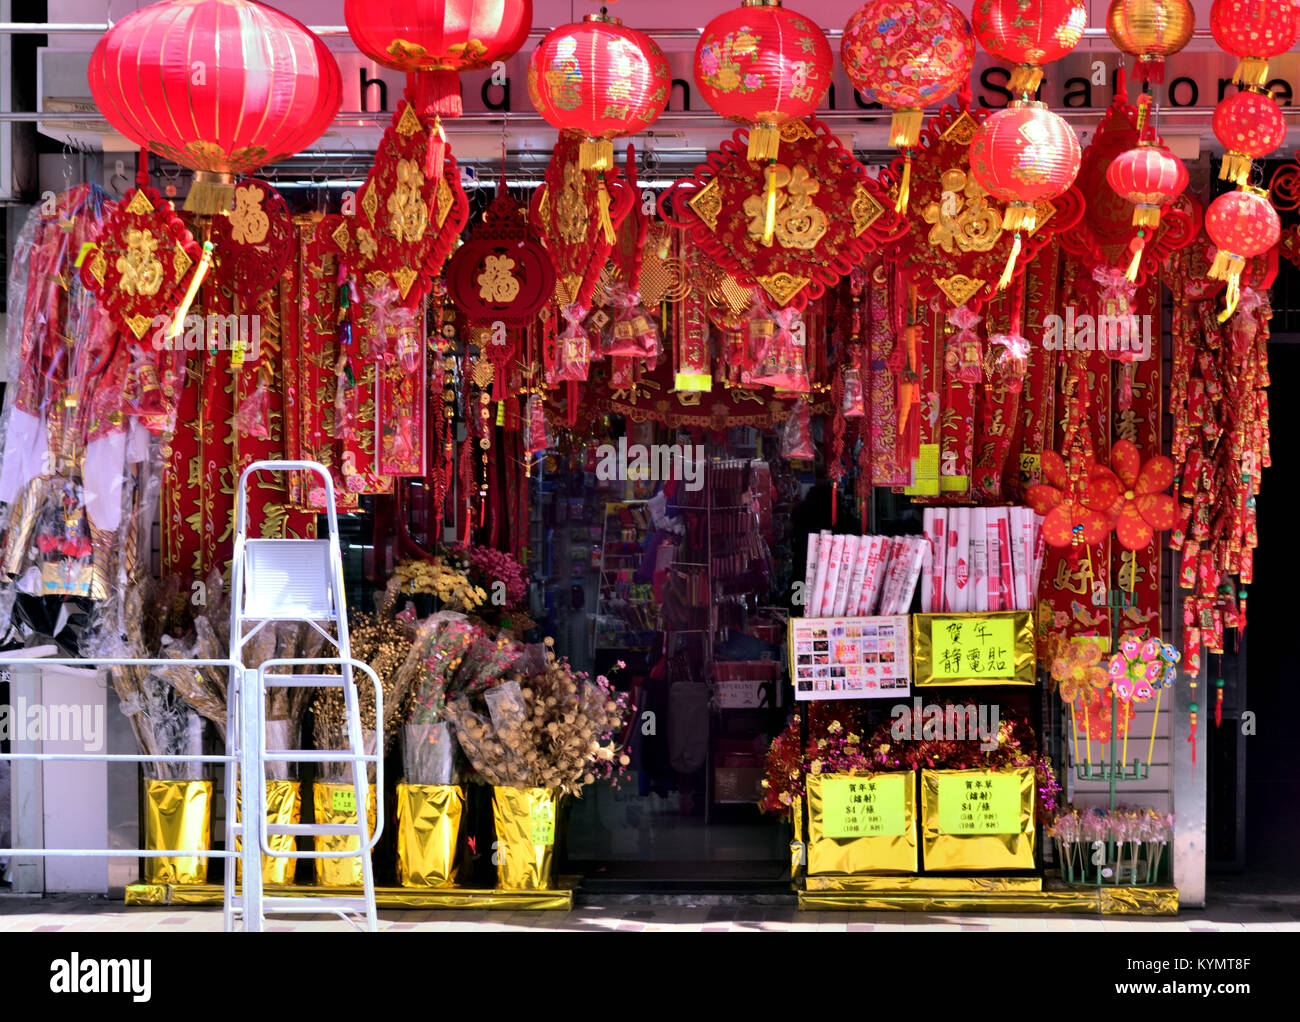 Chinese New Year decorative items in display Stock Photo